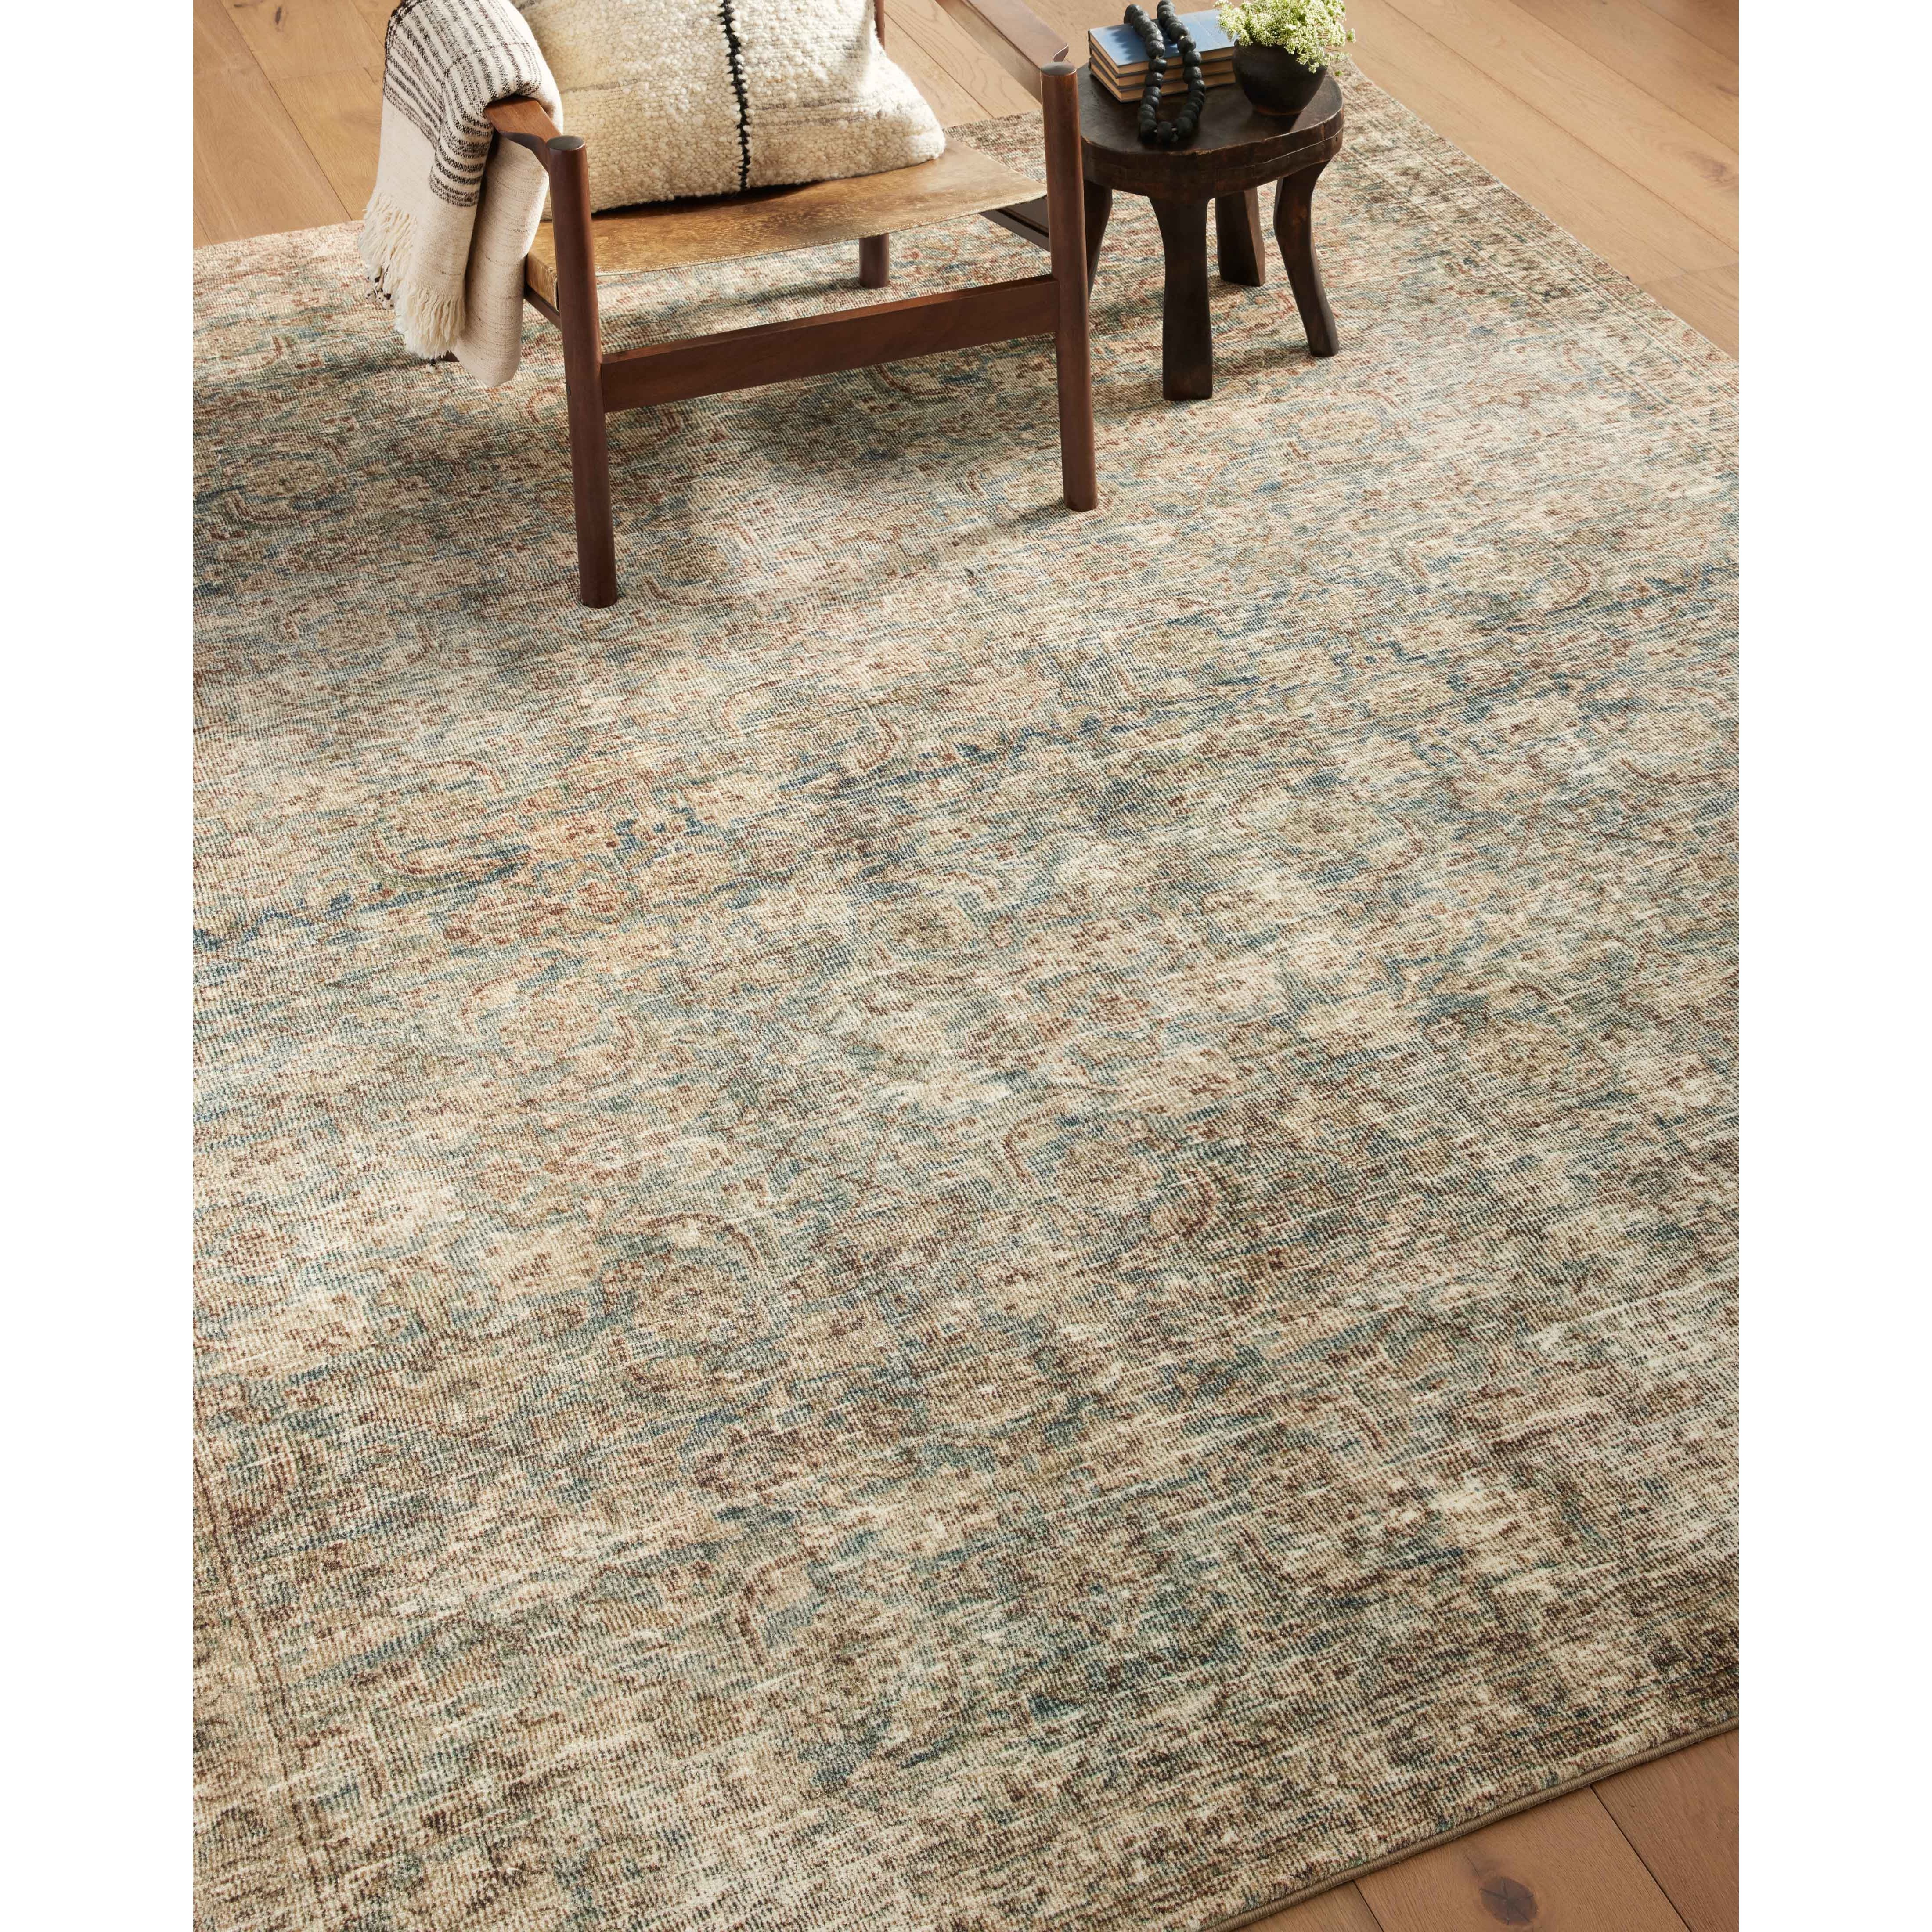 With the faded feel of an antique rug, the Amber Lewis x Loloi Morgan Sea / Sage Rug is a feat of modern printed construction. These impressive area rugs expertly blend sophisticated tones to recreate the dynamic colors of a vintage textiles. Power-loomed of CloudPile™ construction, these rugs are extra-soft to walk upon yet still durable for high-traffic rooms. Amethyst Home provides interior design services, furniture, rugs, and lighting in the Dallas metro area.